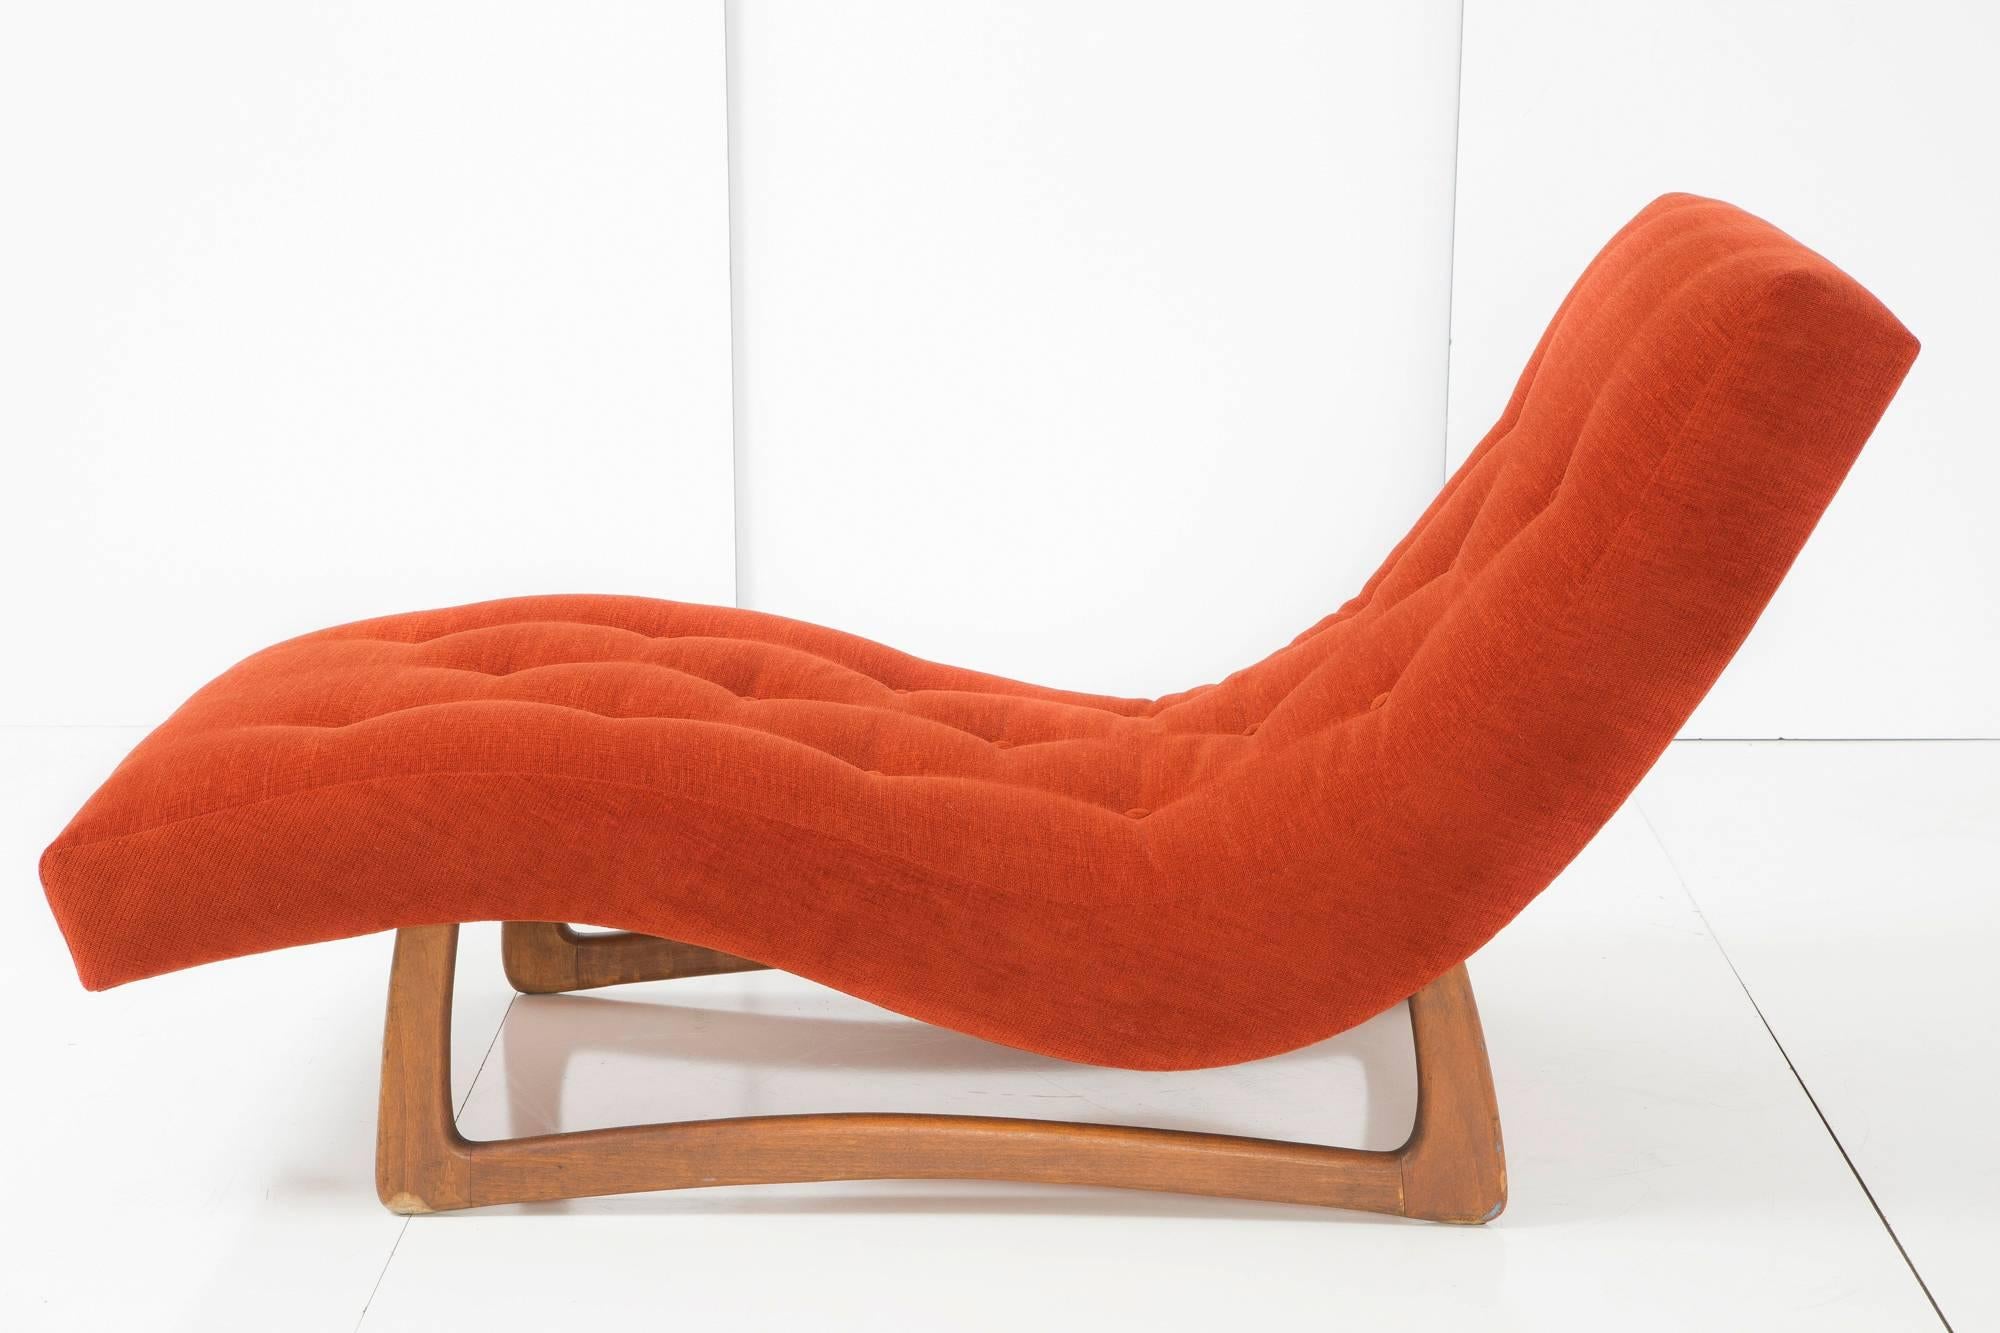 Wave lounge chair by the iconic Adrian Pearsall. The impeccable, brand new upholstery in Knoll's highline burnt orange. Original vintage frame. 